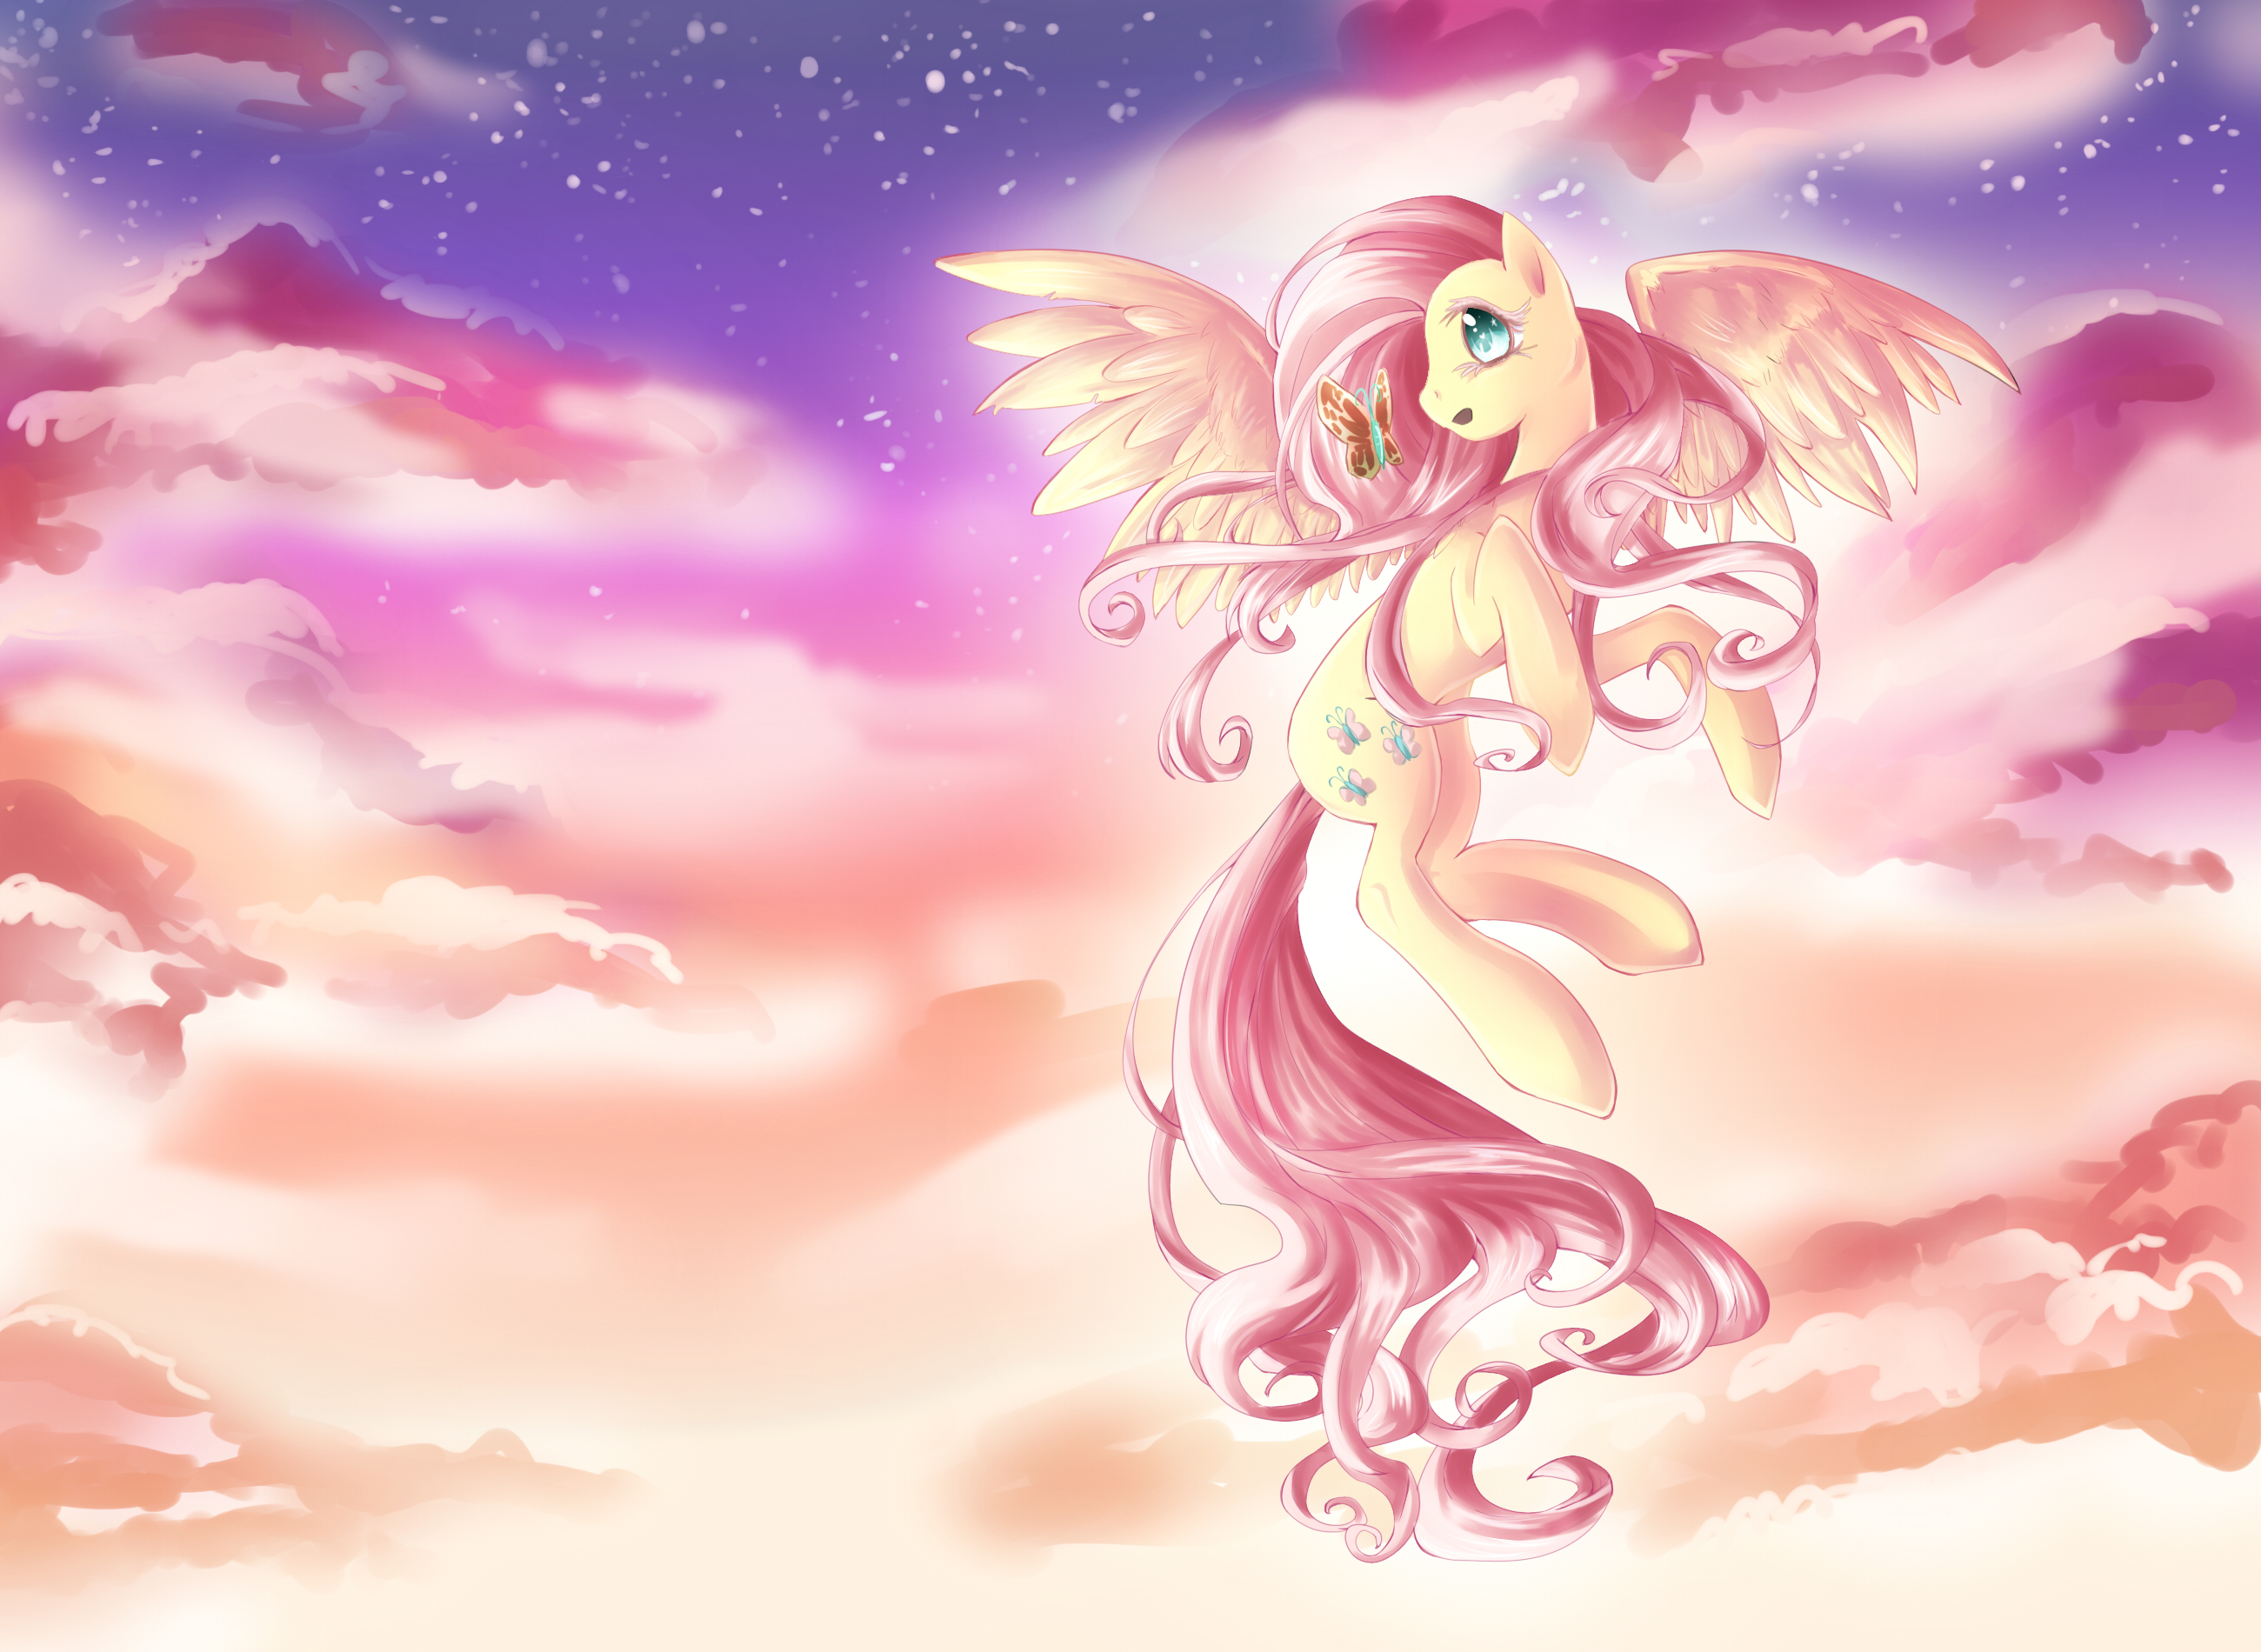 Fluttershy Forever by dreampaw